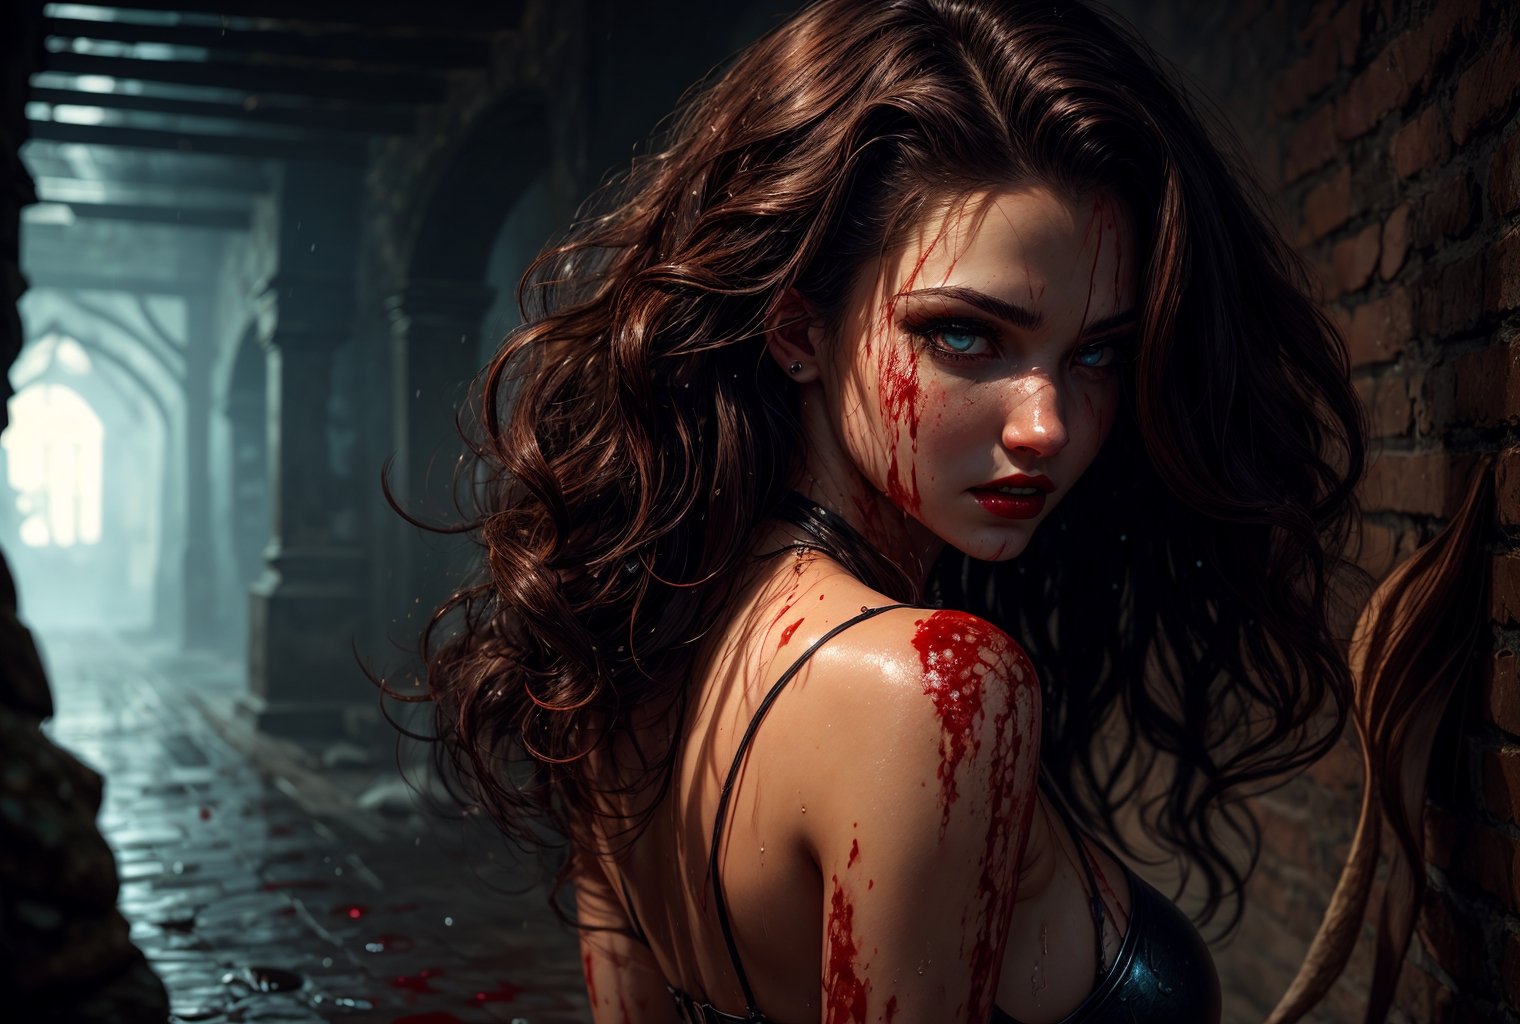 amoled ultra realistic hd photo of a female super hero, RAW,

extra long wavy brown hair, glowing, expressive face, female vampire fangs, red lips, bloody lips, blood wet, blood bath,

in a dungeon, medieval setting, rpg game scenery, tentacles, wet, raining, raining blood,

dynamic camera angle from above, from back,

(PnMakeEnh),

artwork by sweetroll